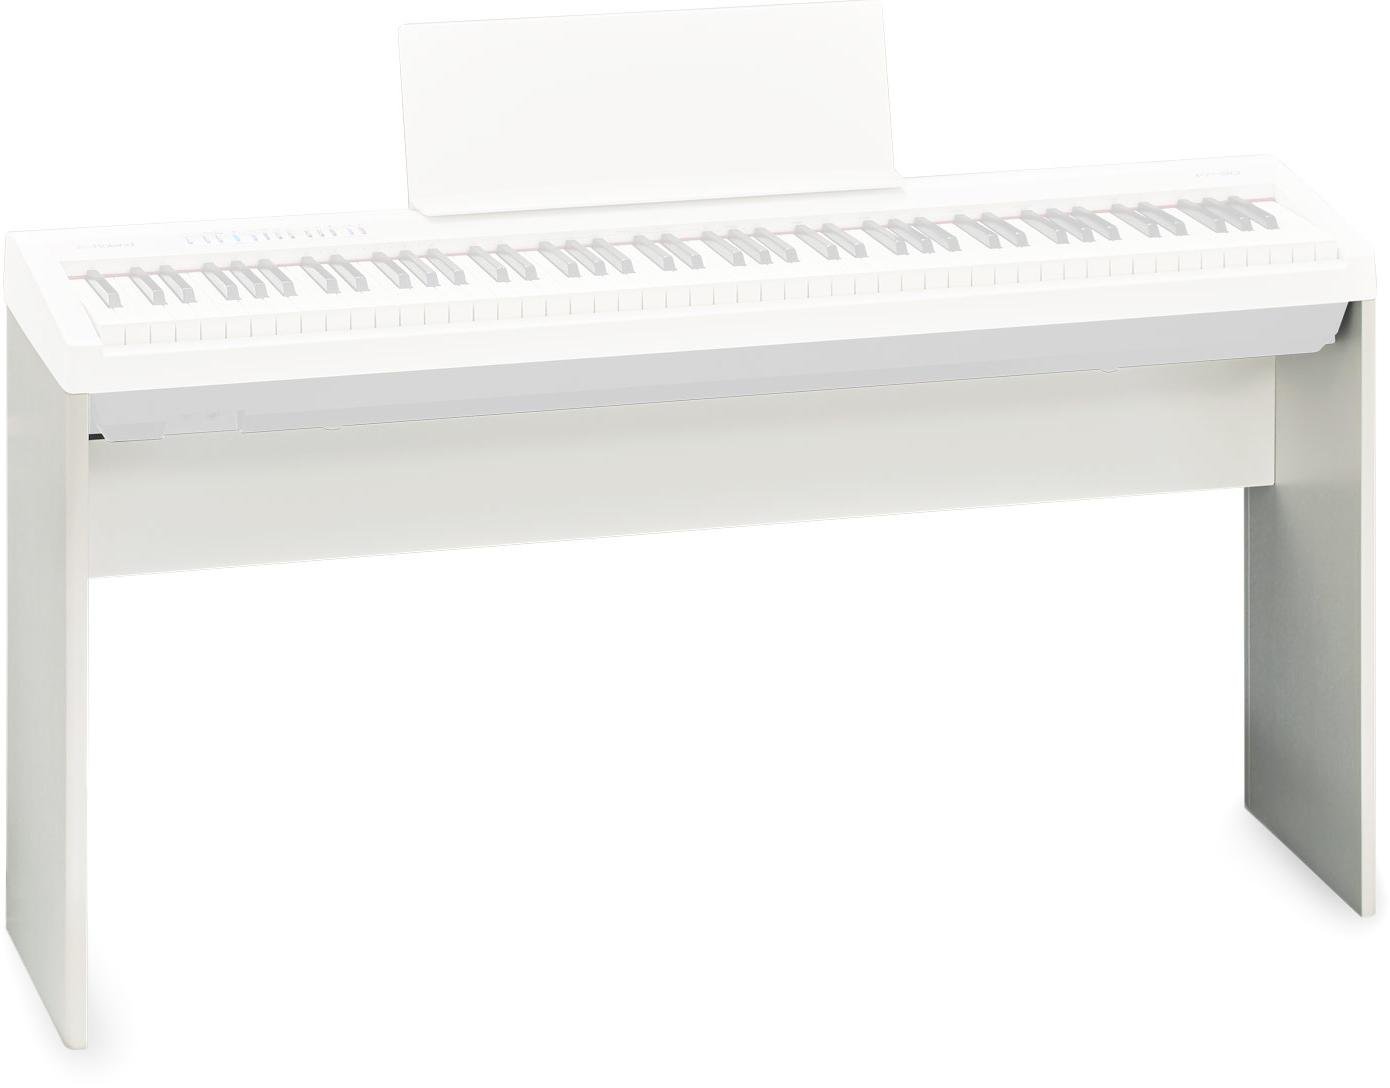 Roland Ksc 70 Stand For Fp 30 Digital Piano White Sweetwater